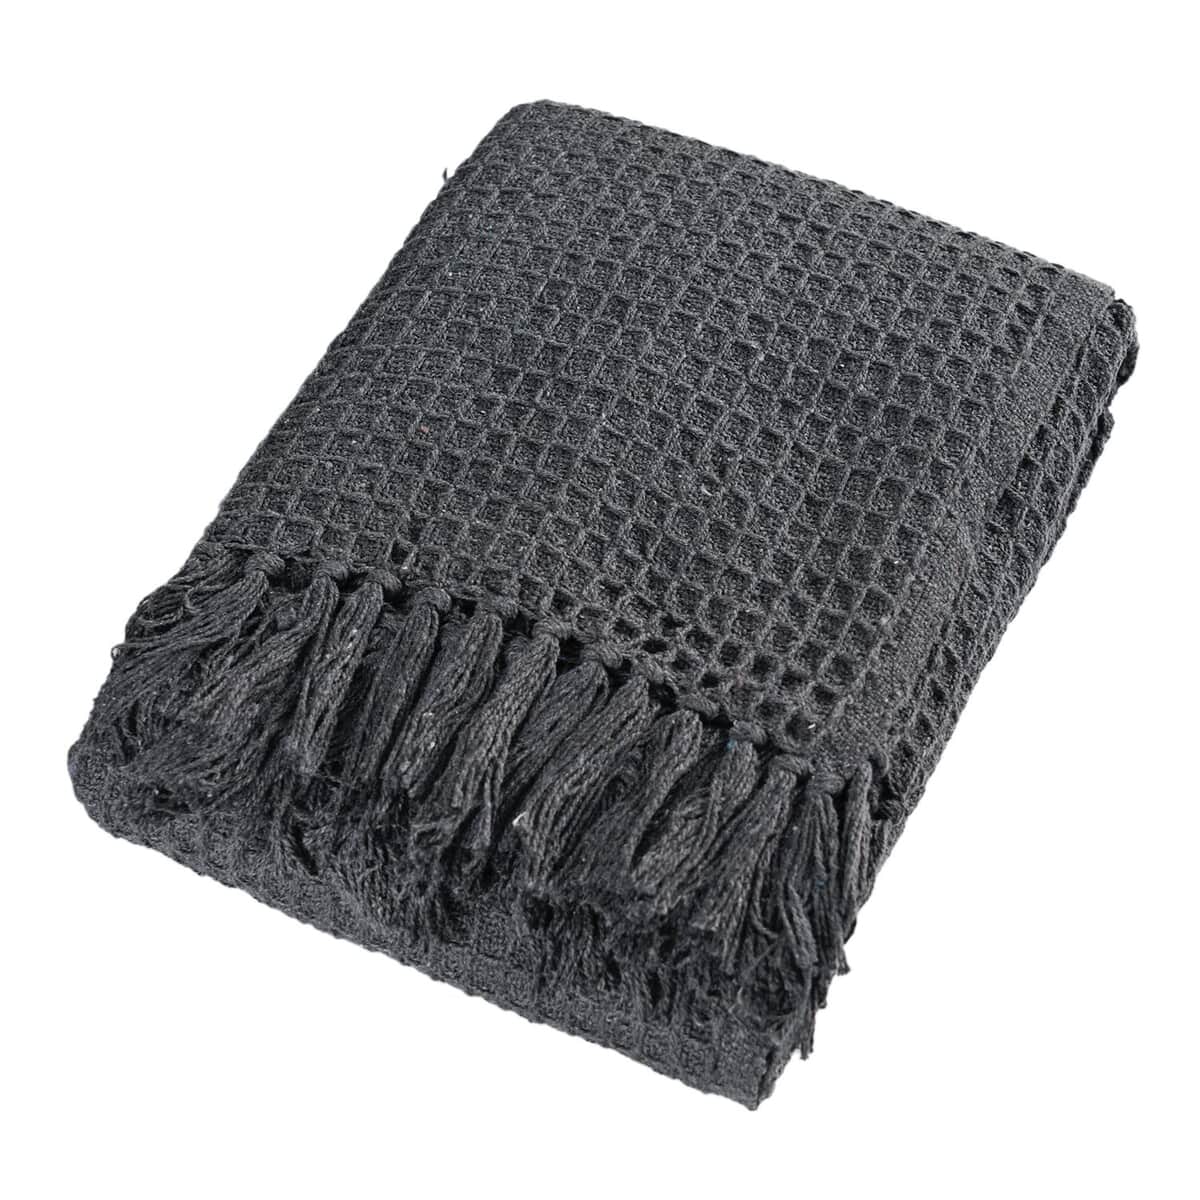 Charcoal Honeycomb Pattern Throw with Tassels (Cotton) image number 0